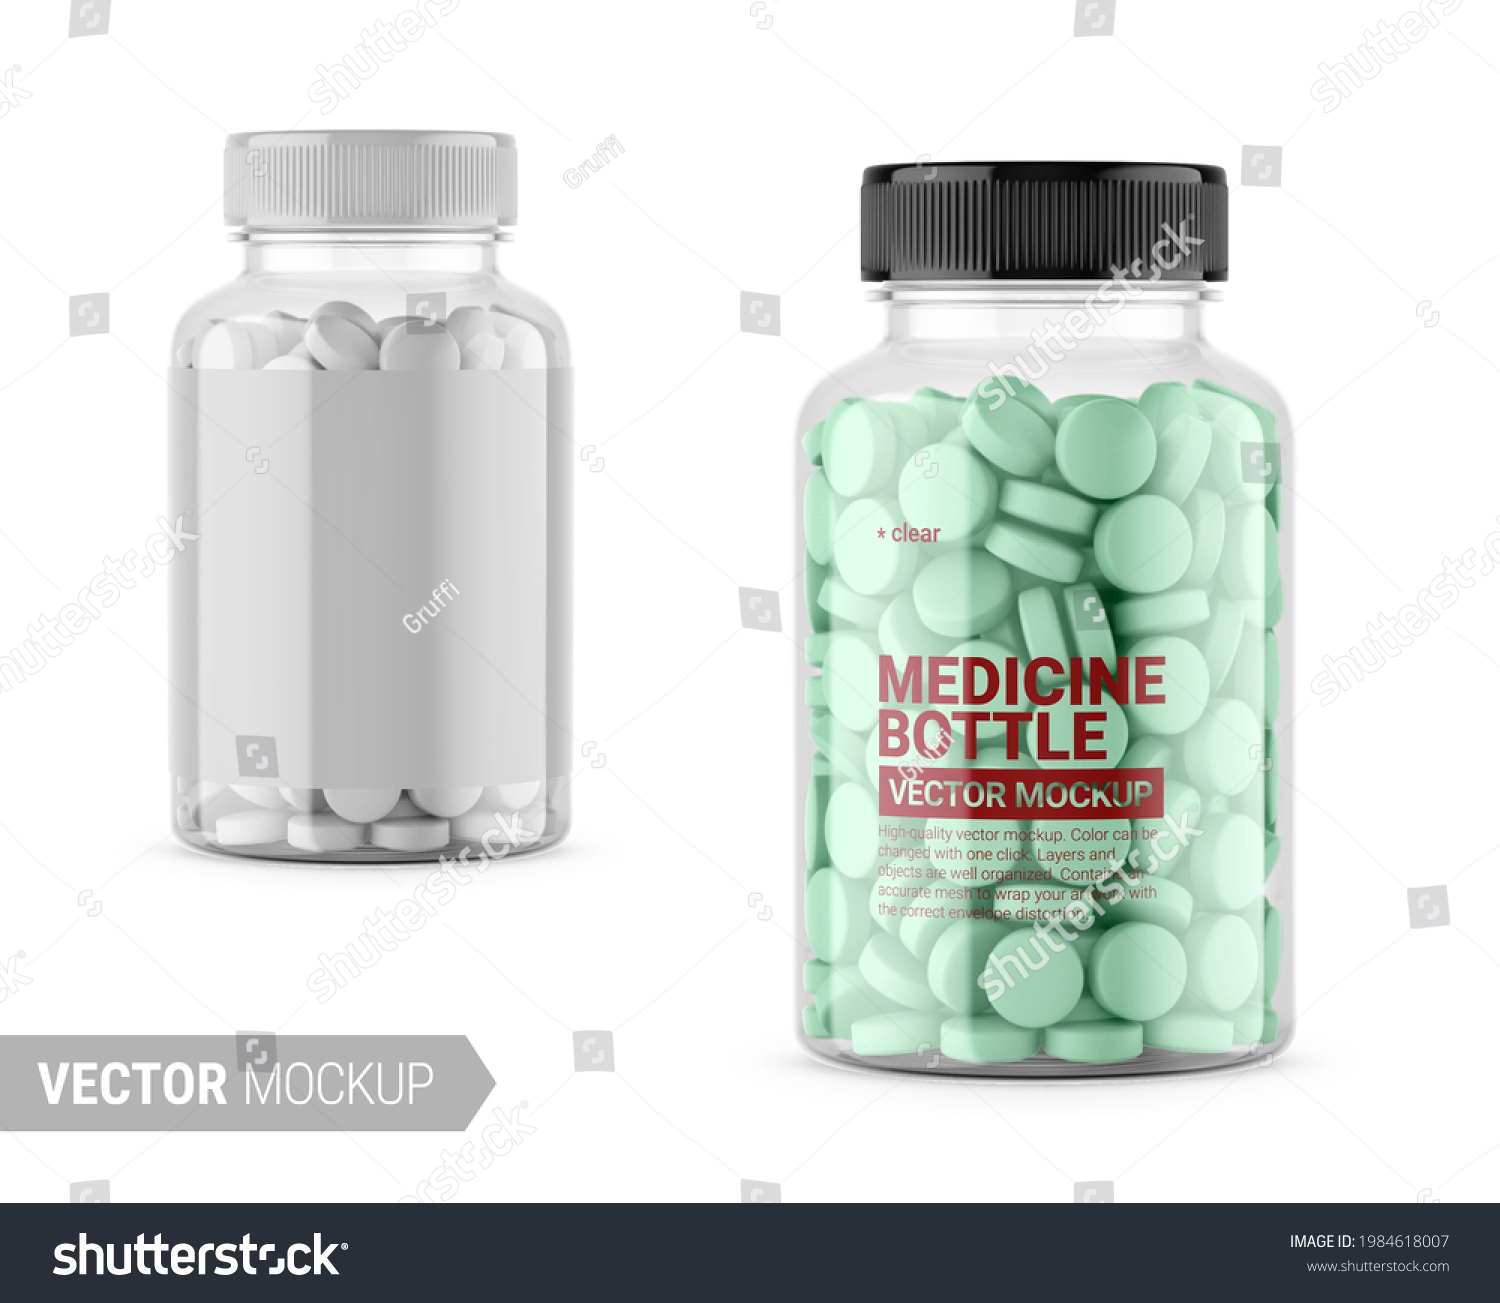 Clear glass medicine bottle with tablets, transparent on background. Contains accurate mesh to wrap your design with envelope distortion. Photo-realistic packaging vector mockup template with sample. #1984618007